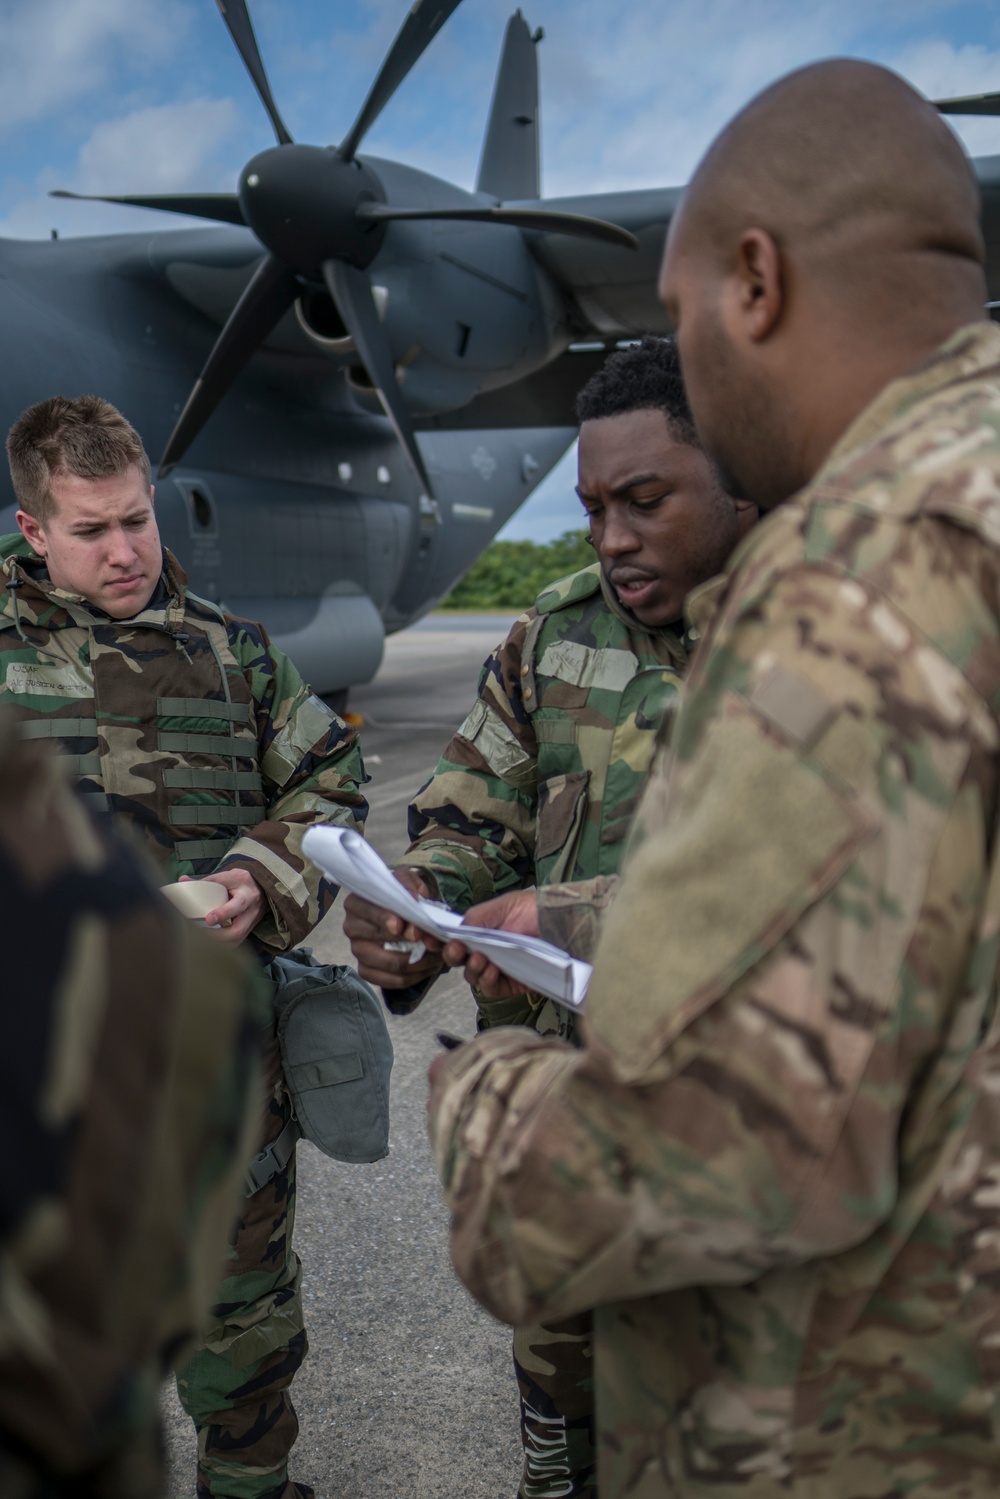 353rd SOMXS practices aircraft launch and recovery in protective gear